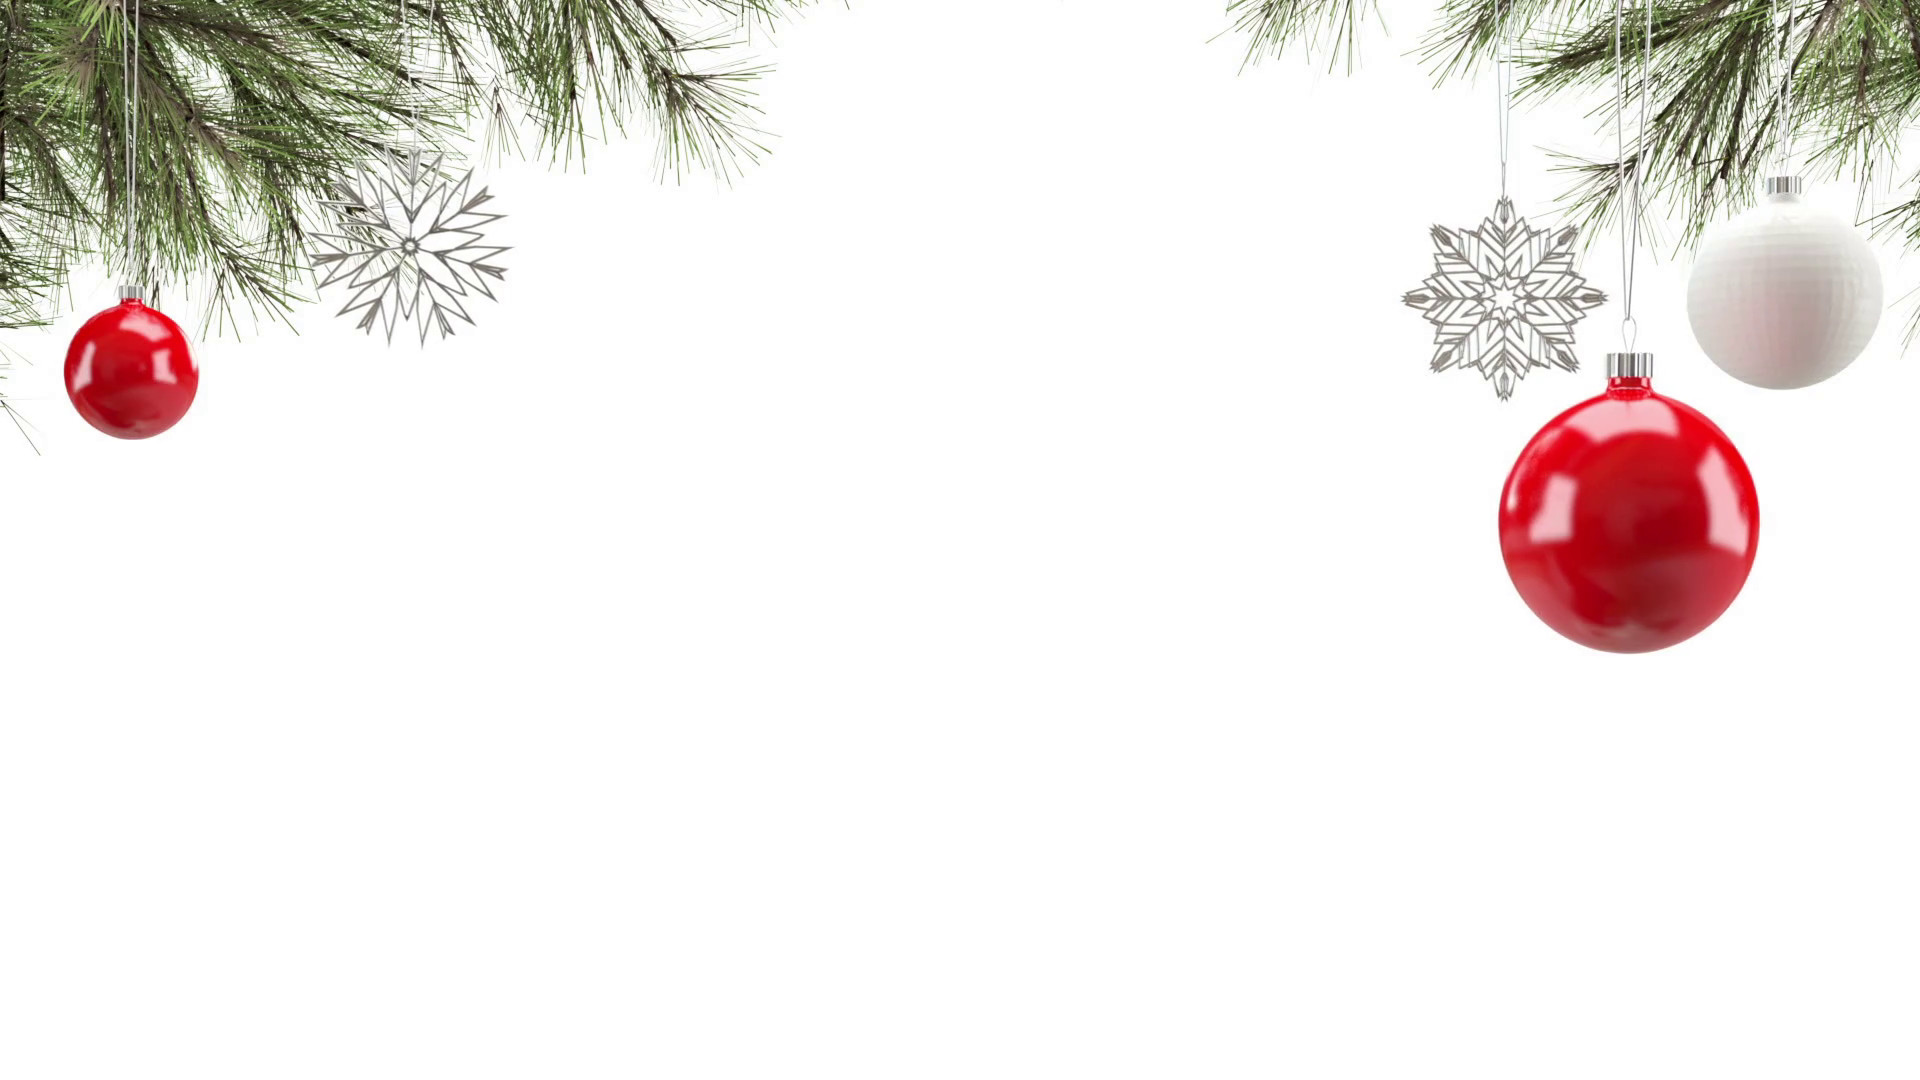 Background Christmas Images (53+ images)